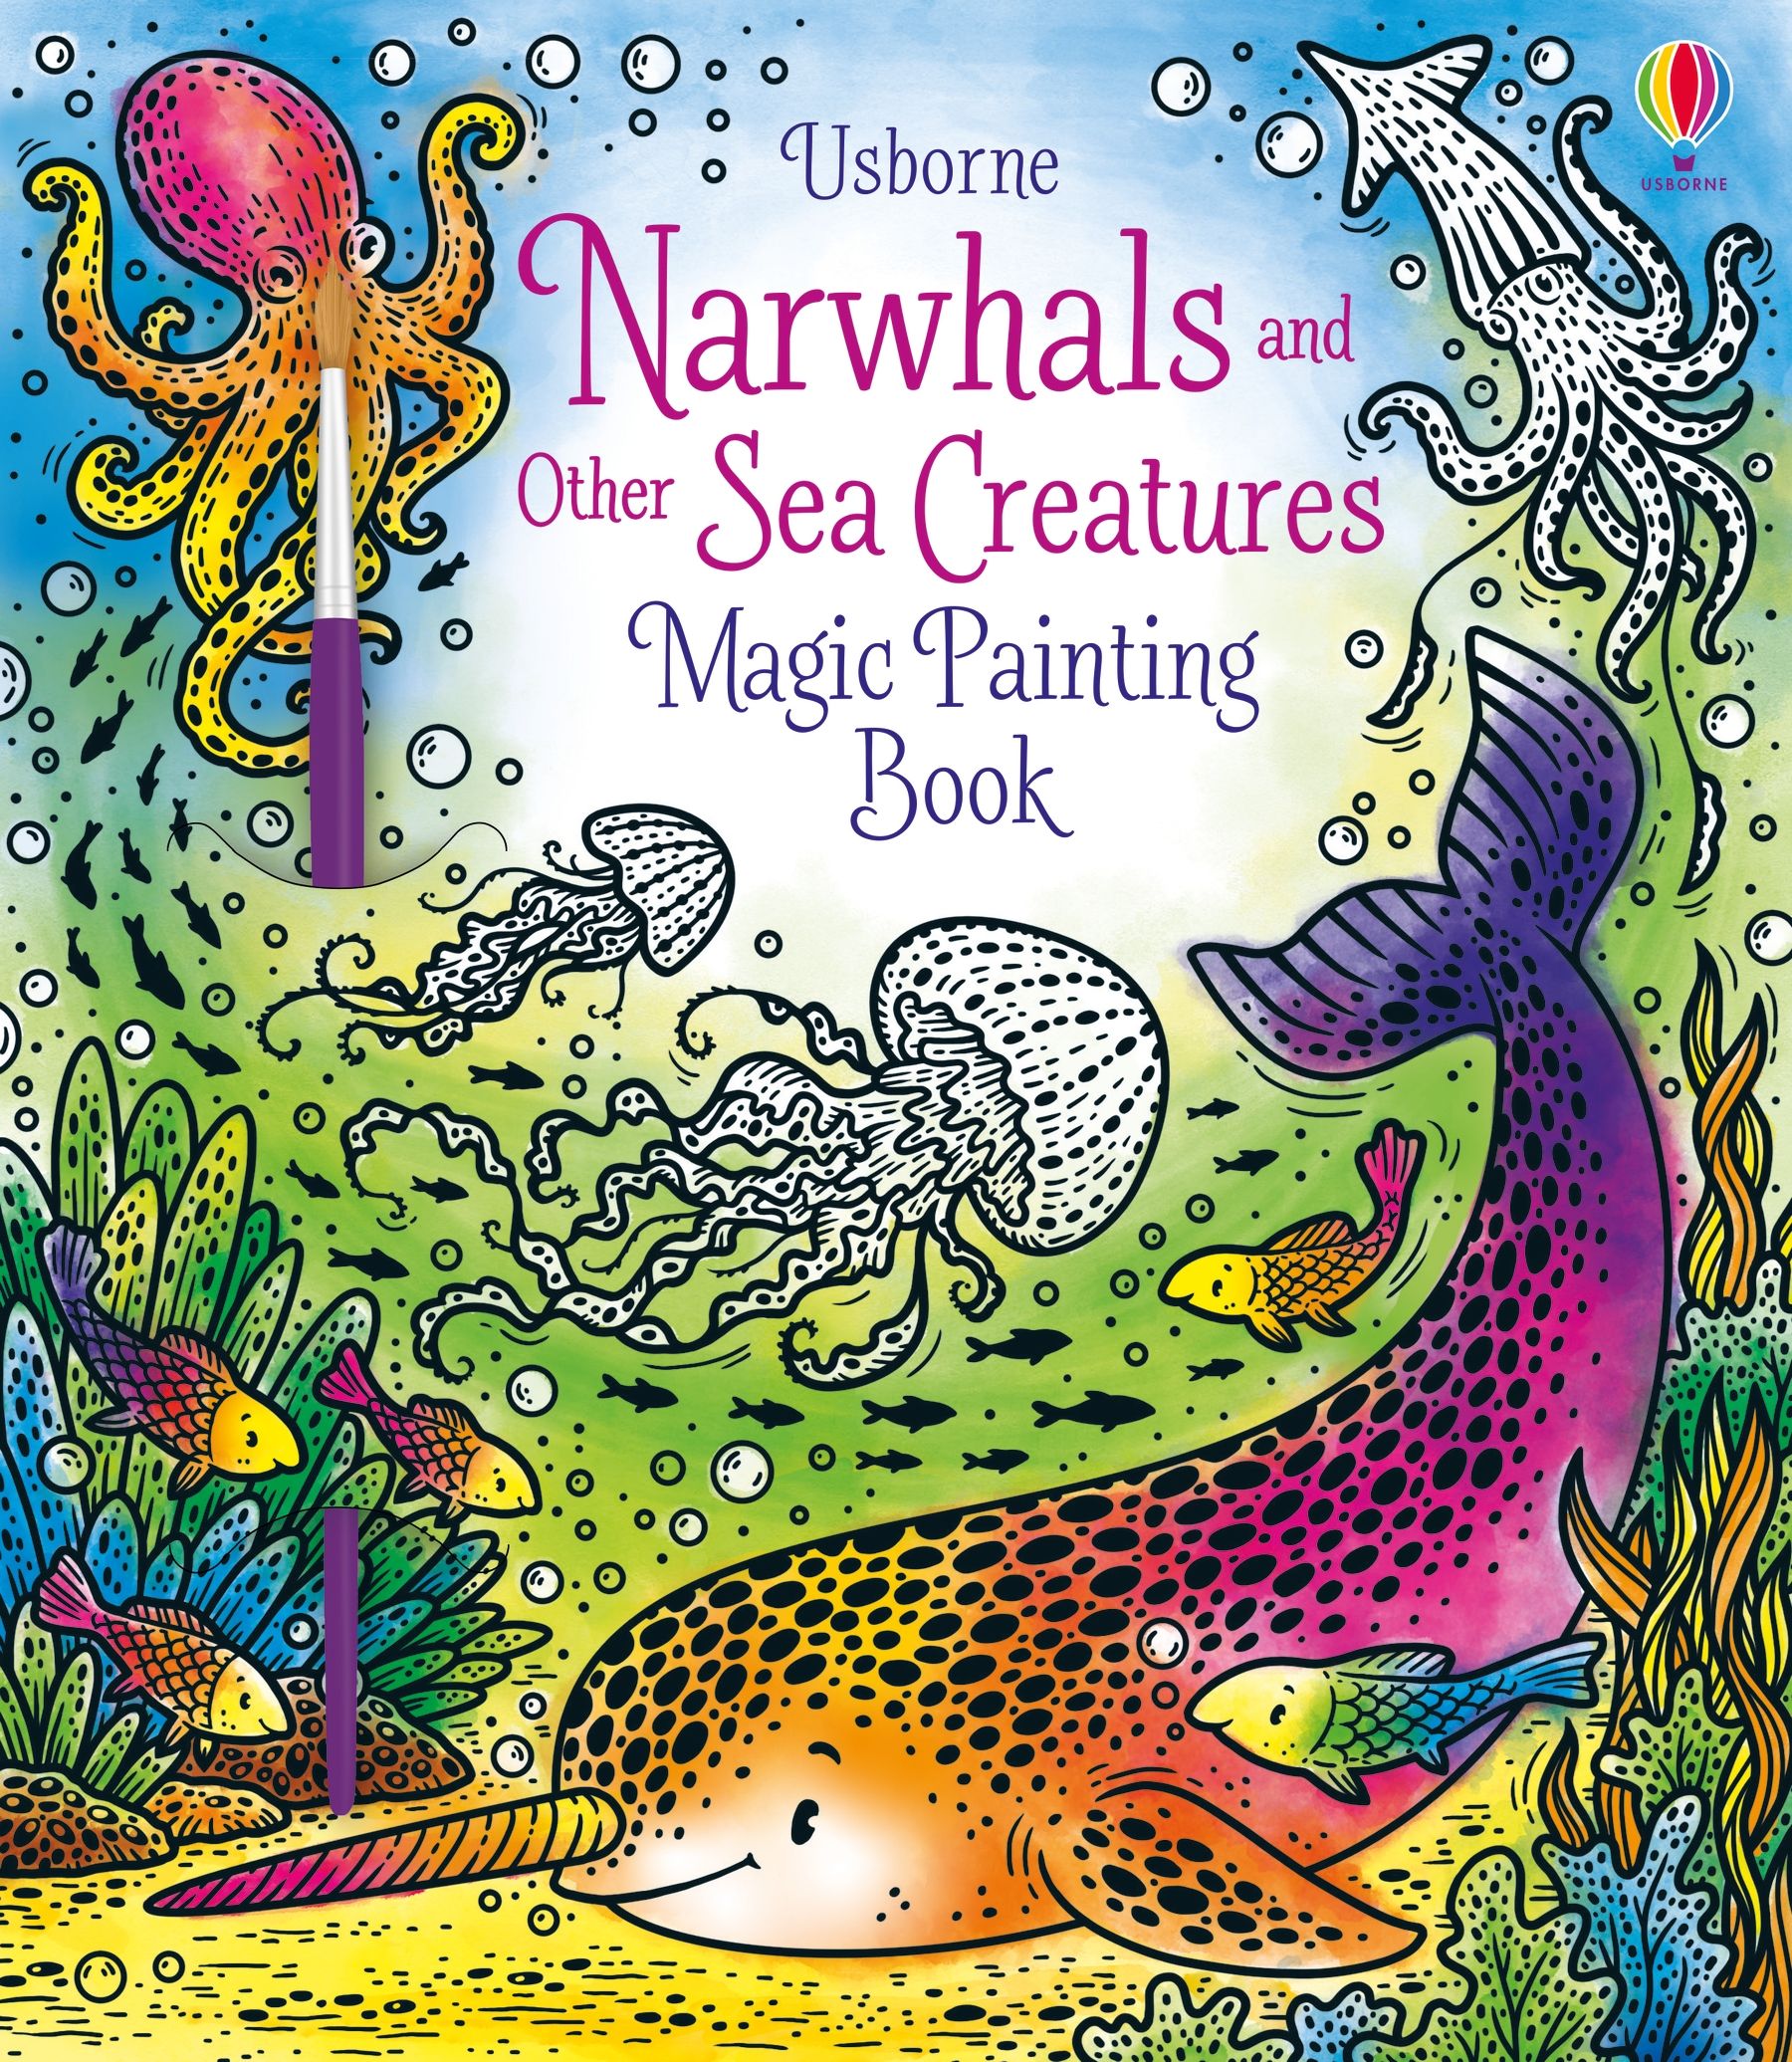 Usborne Books | Magic Painting Book - Narwhals & Other Sea Creatures